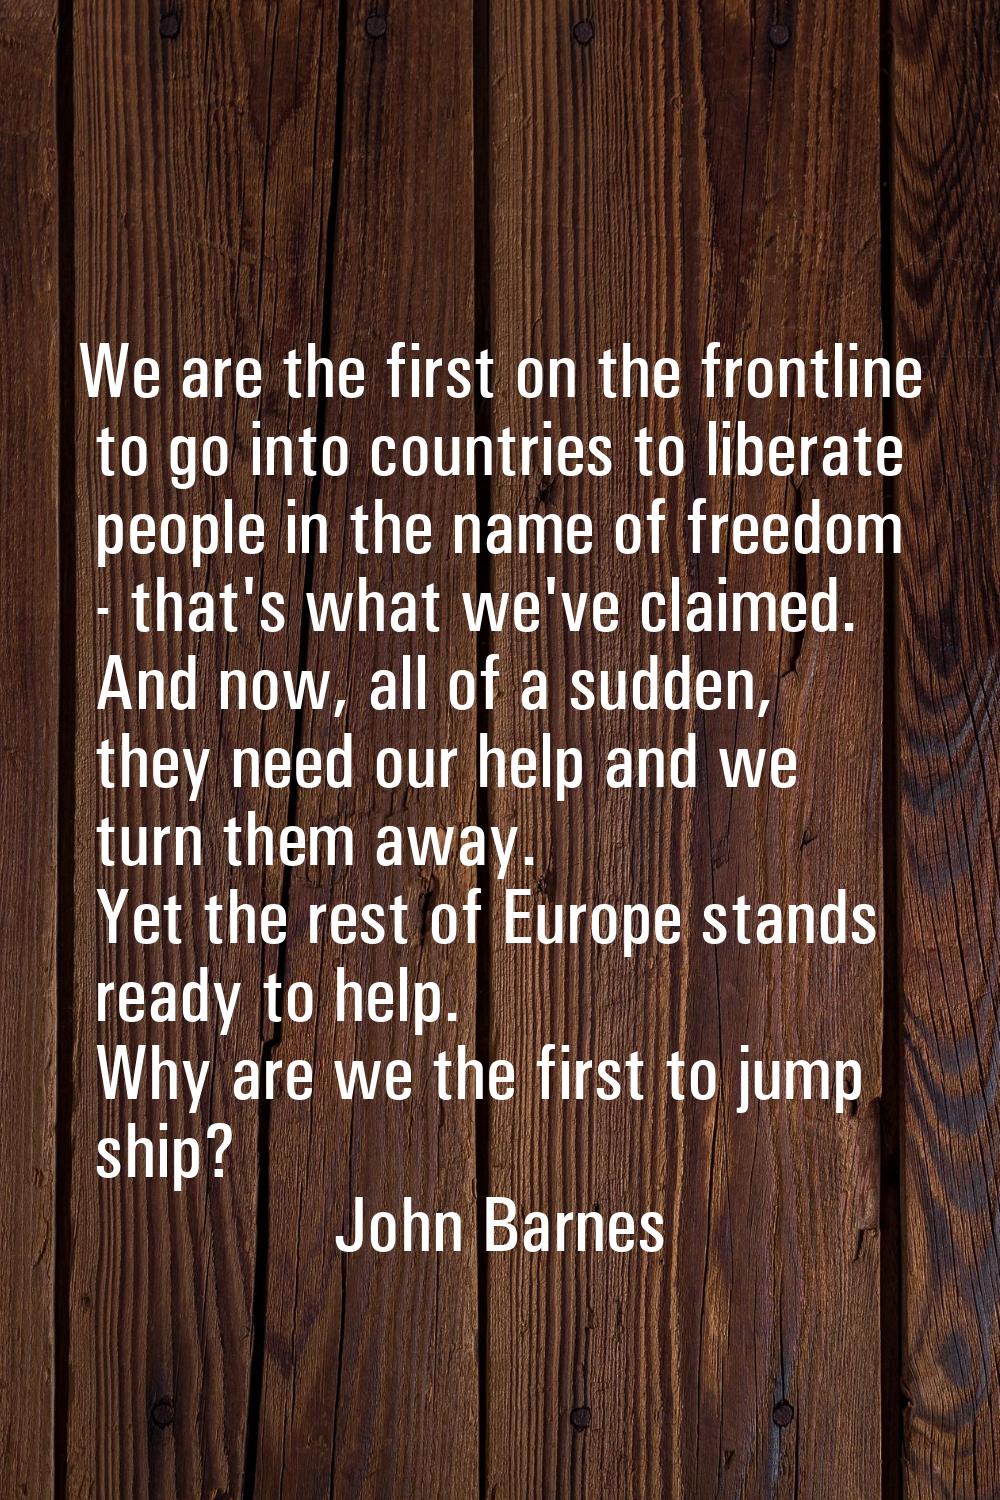 We are the first on the frontline to go into countries to liberate people in the name of freedom - 